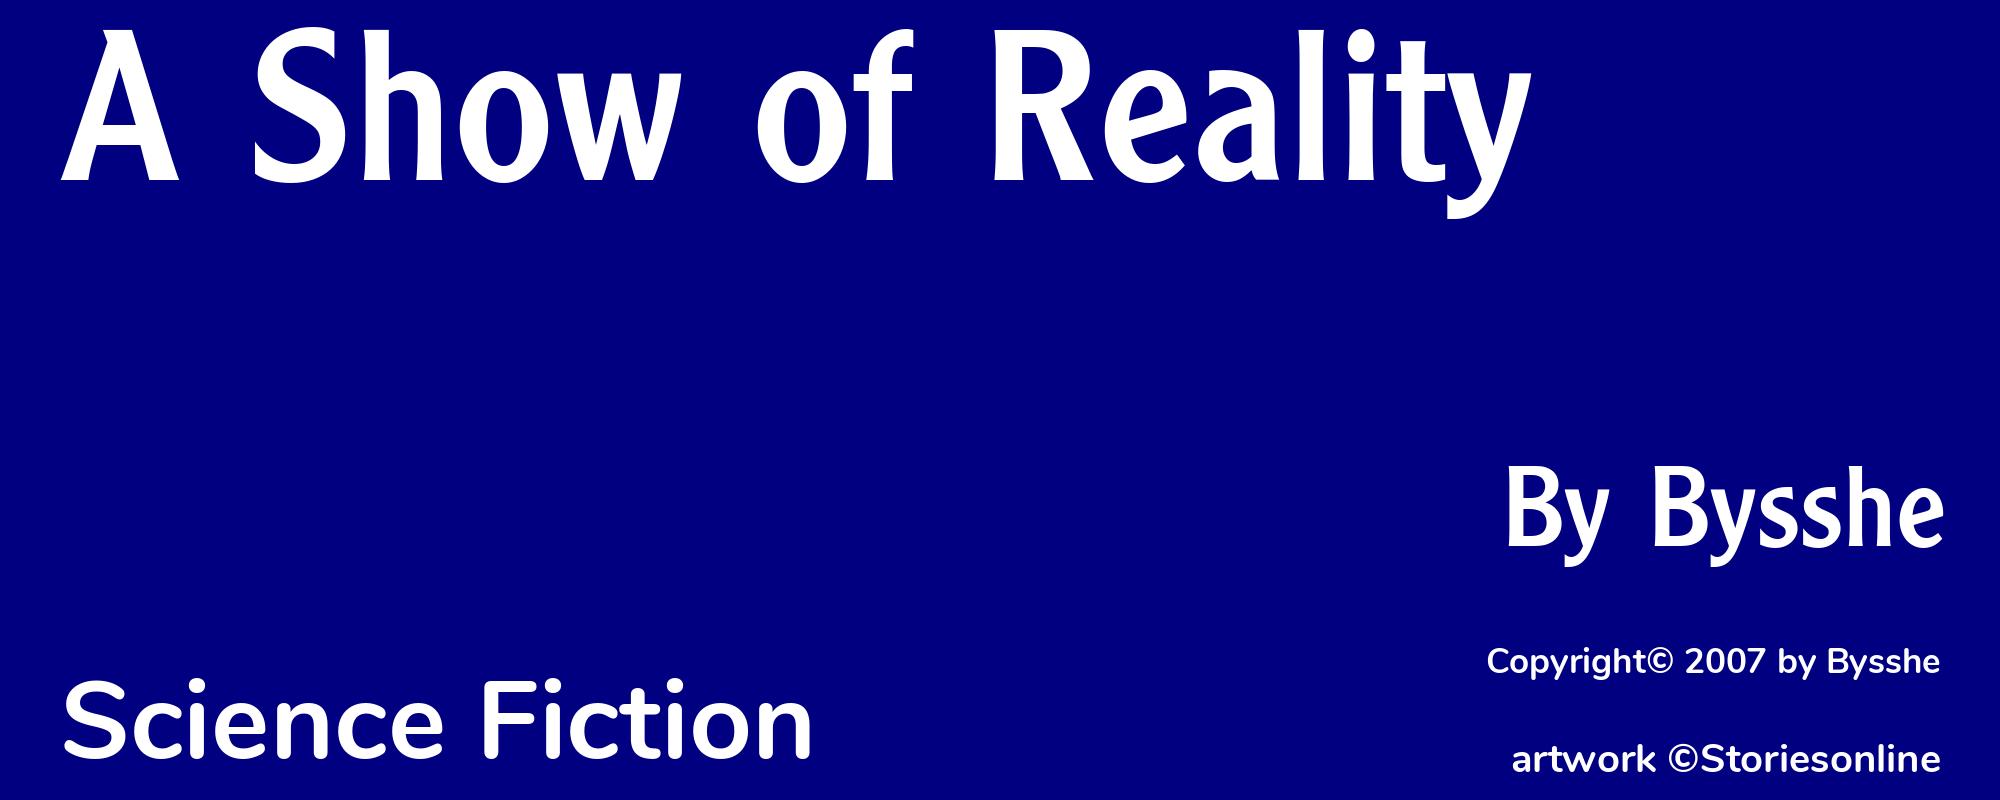 A Show of Reality - Cover